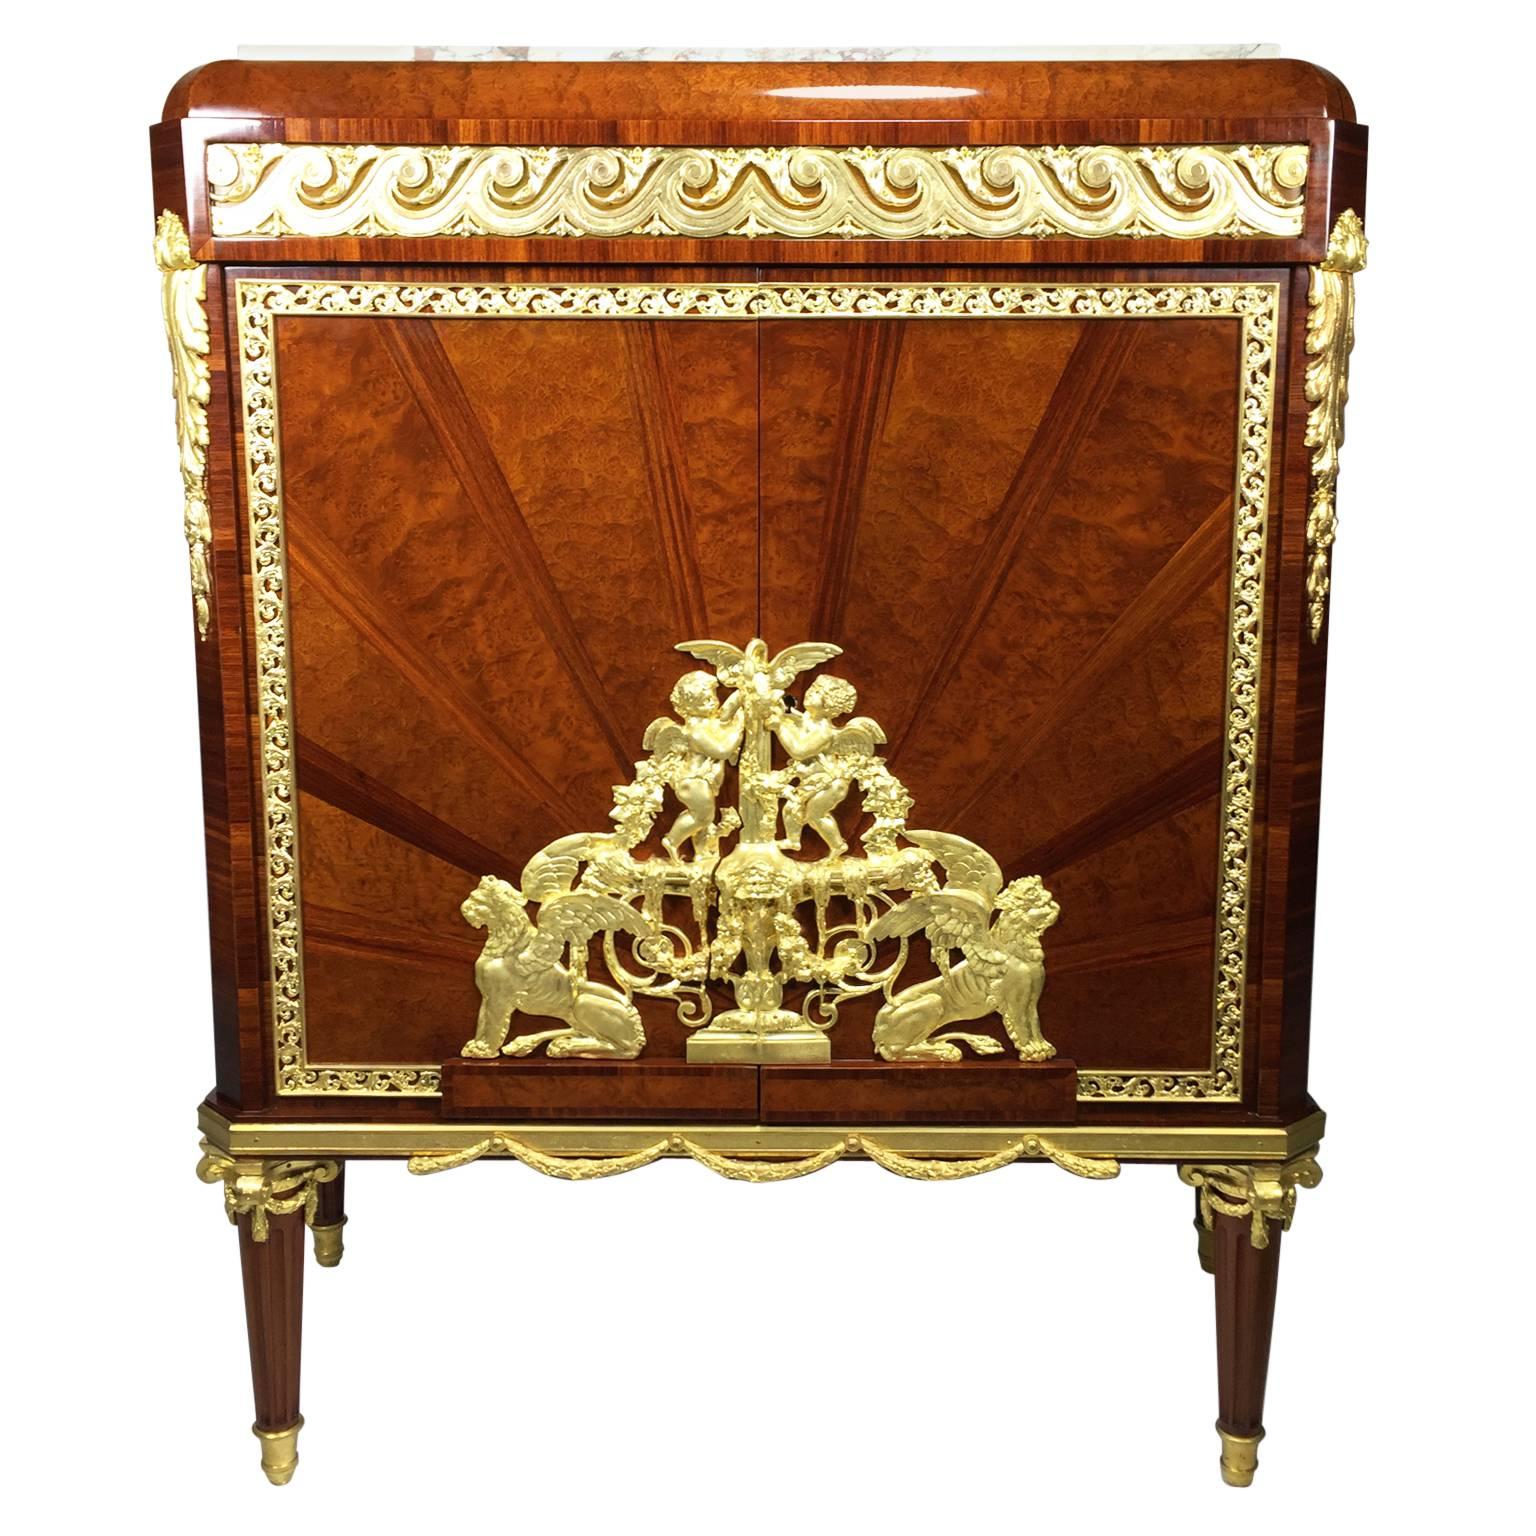 French 19th-20th Century Louis XVI Style Belle Époque Ormolu-Mounted Cabinet